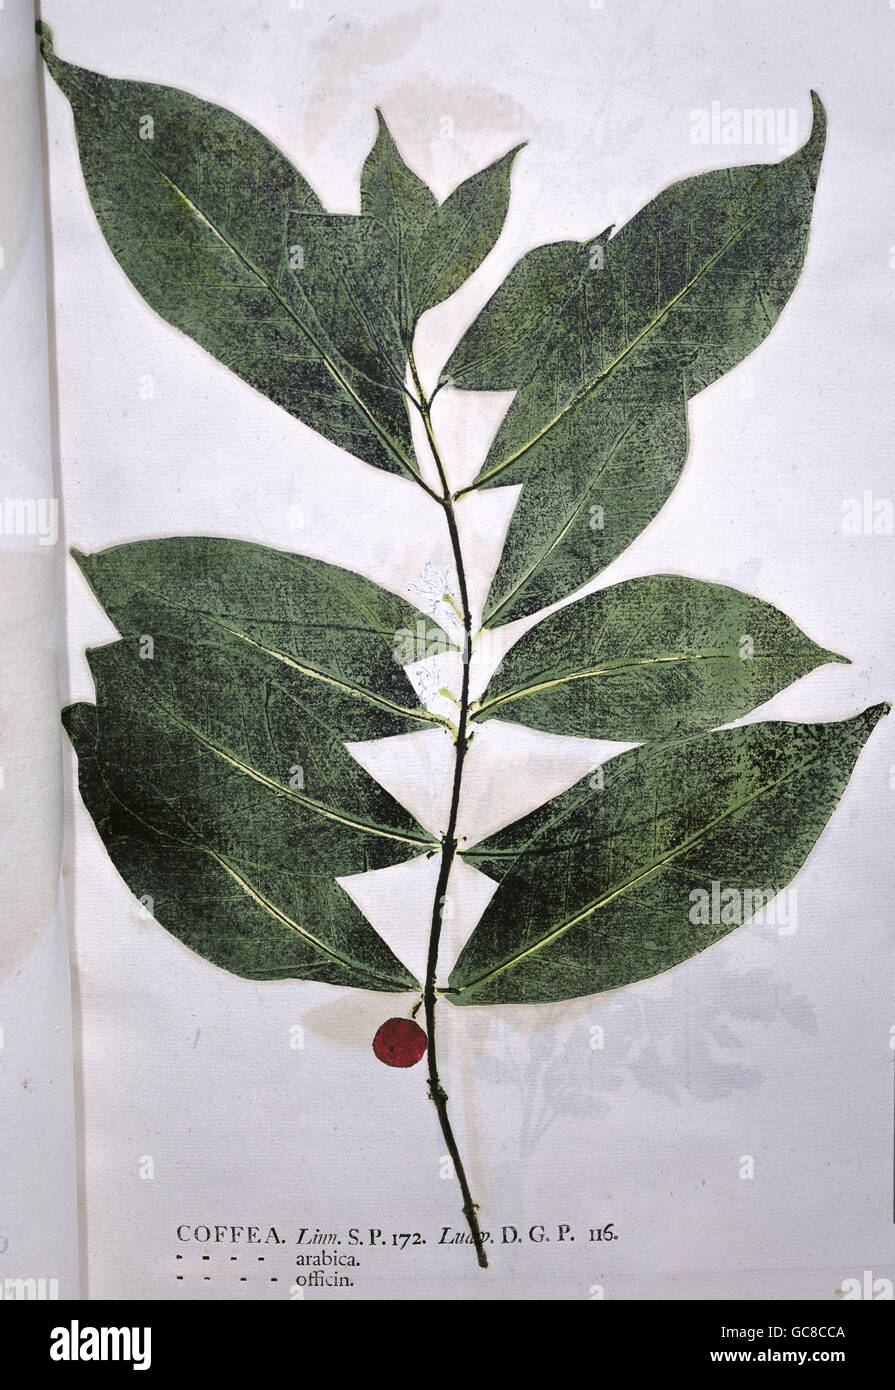 botany, Coffea, Arabica coffee (Coffea arabica), twig, from 'Botanik in Originali', by Johannes Hieronymus Kniphof, Halle, Germany, 1734 - 1757, Gutenberg Museum, Mainz, Additional-Rights-Clearences-Not Available Stock Photo